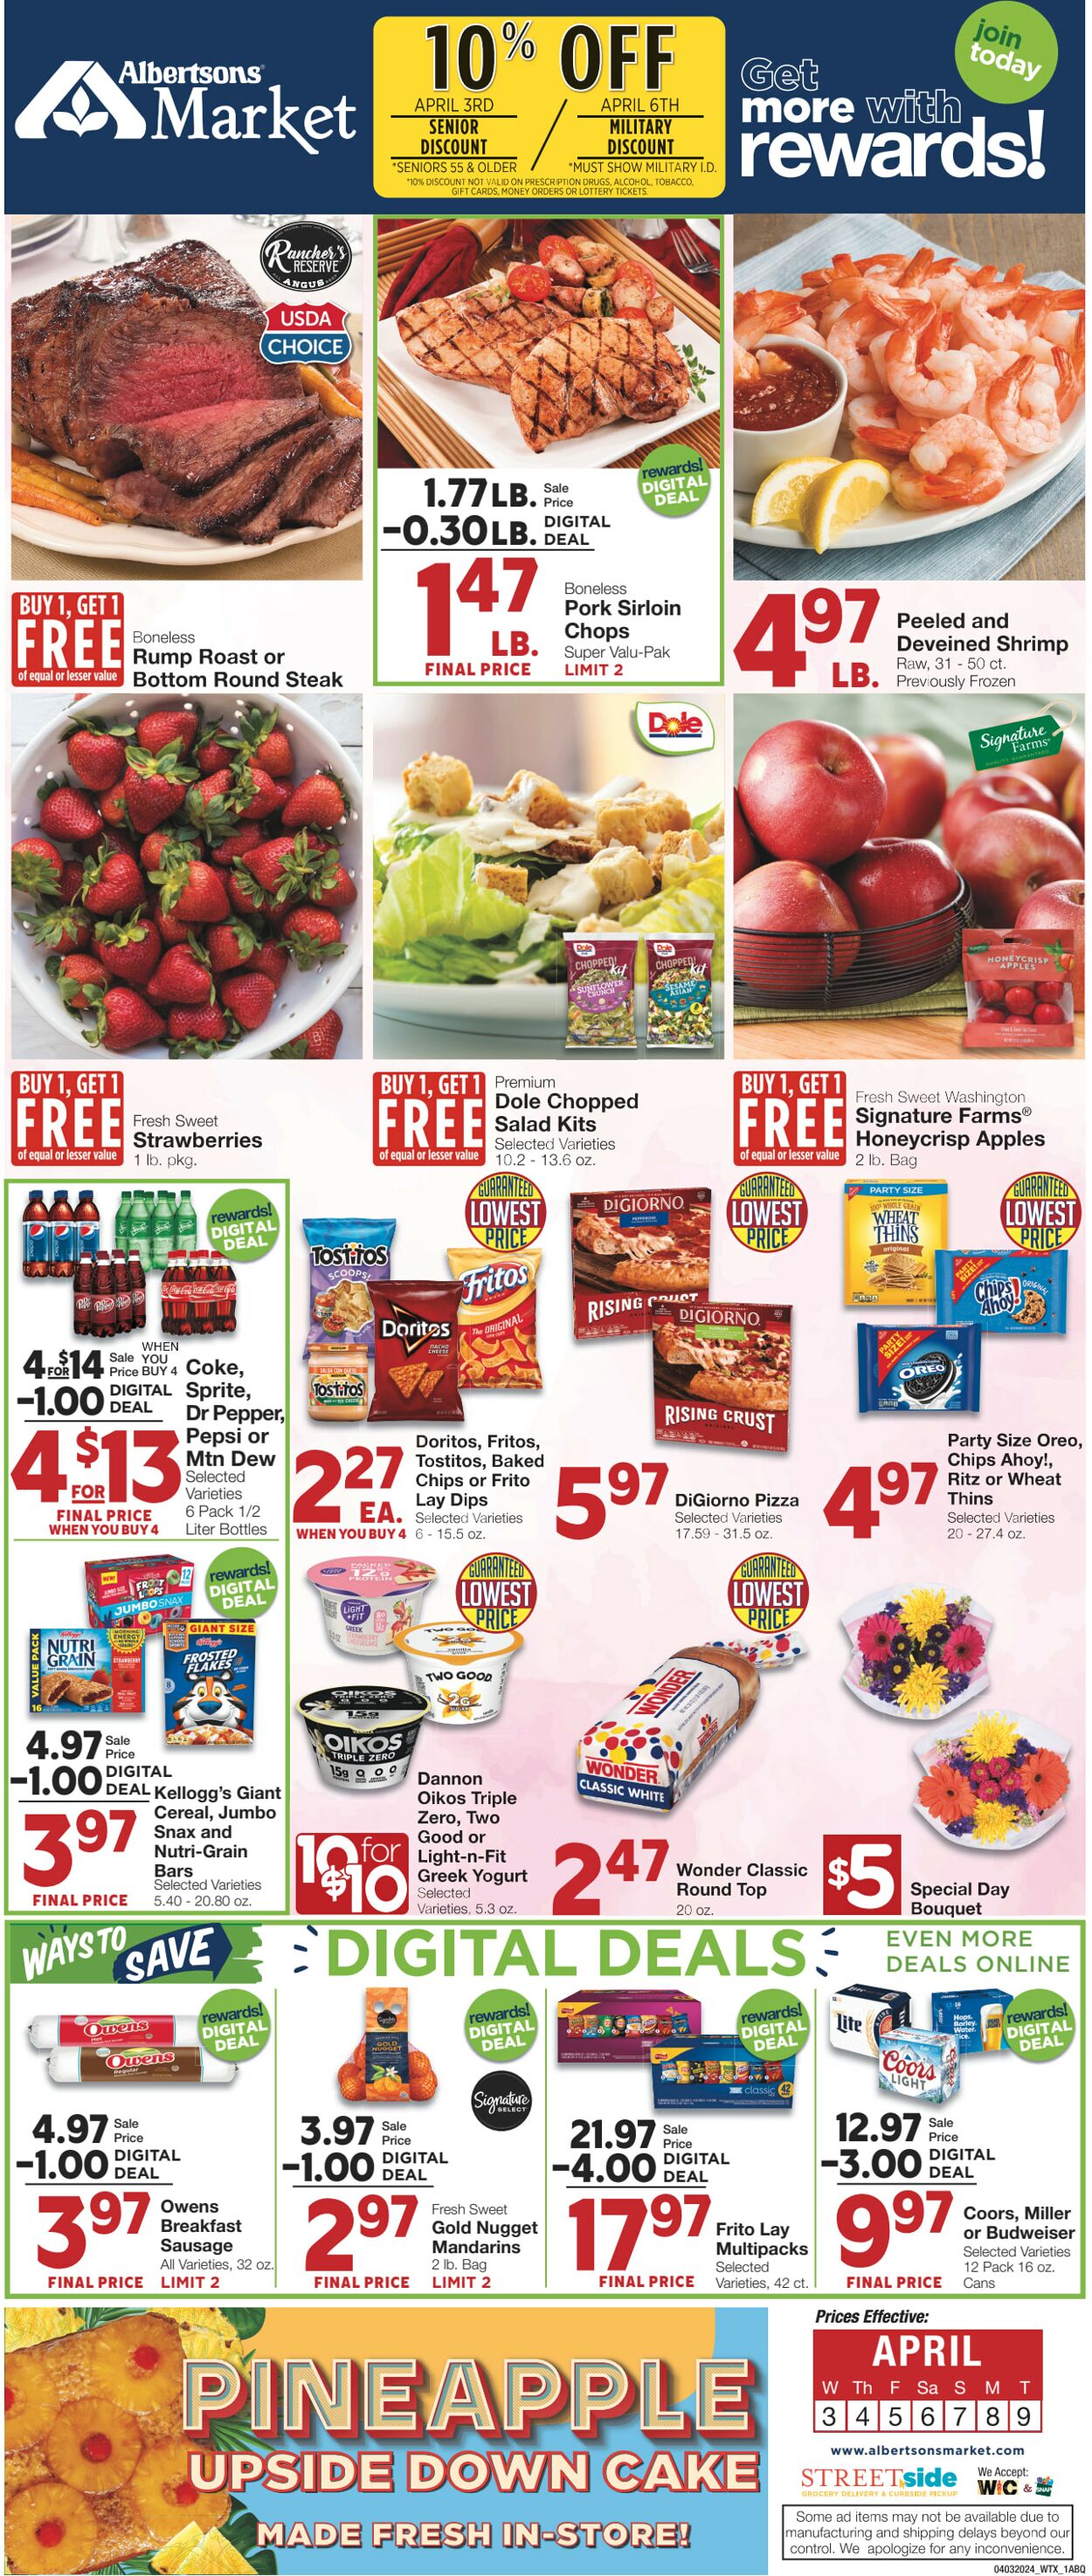 Weekly ad United Supermarkets 04/02/2024 - 04/09/2024